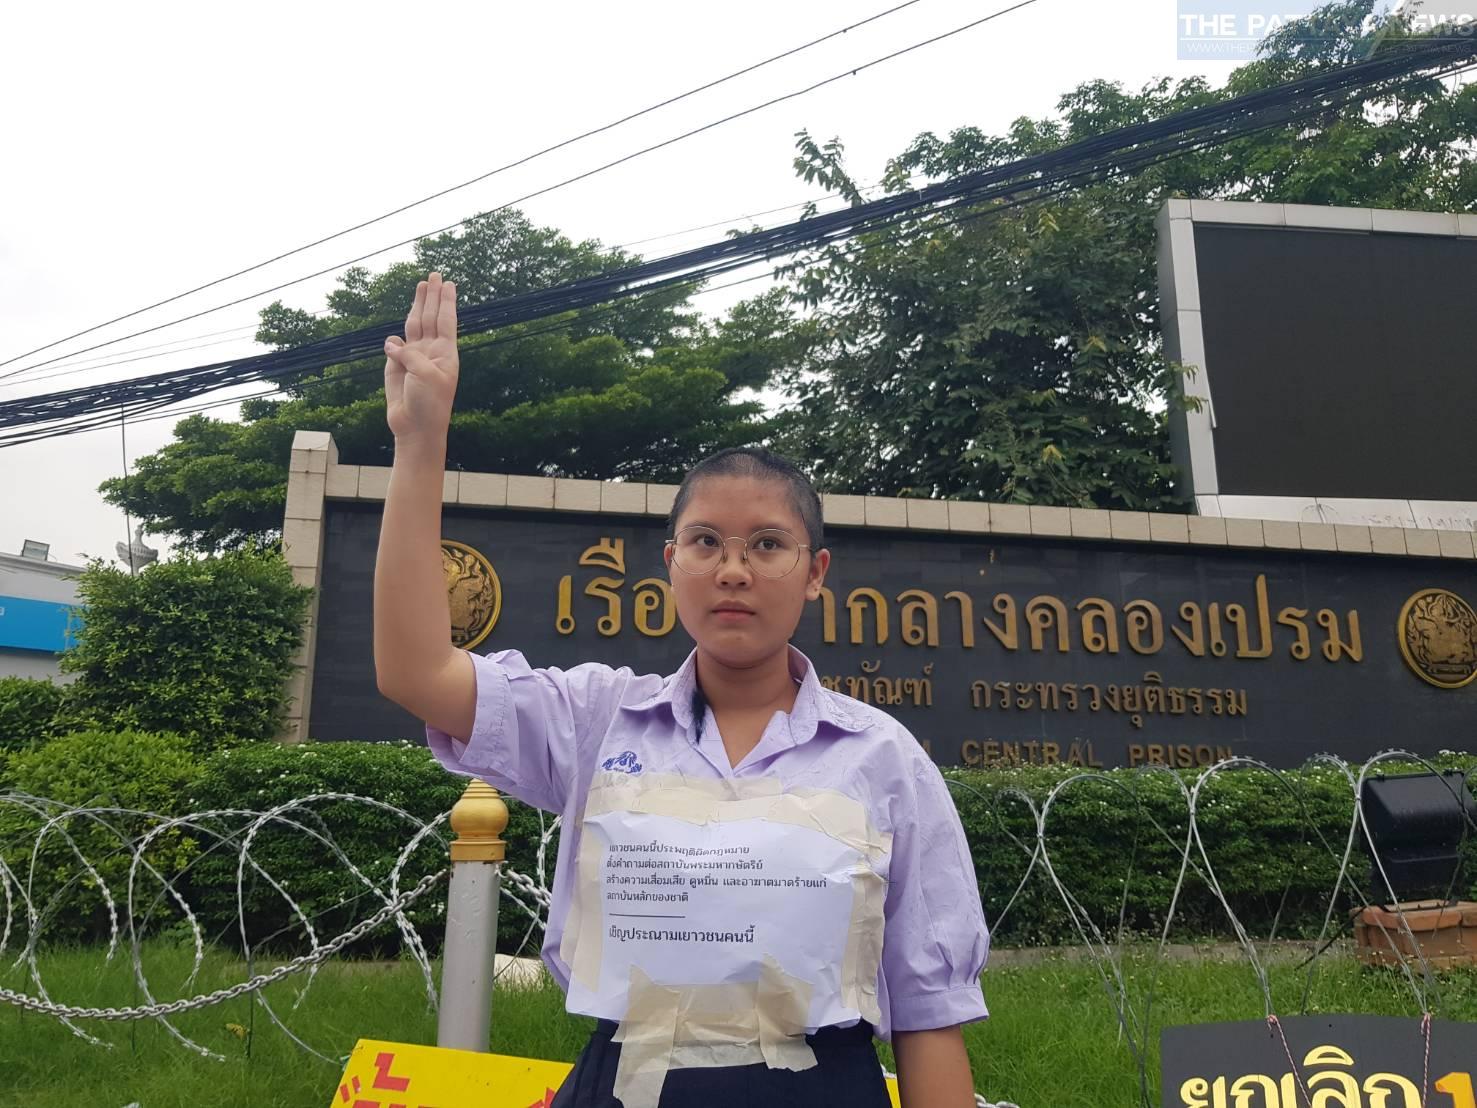 Teenage “Thaluwang” protest leader Ploy shaves her head to protest Thai Court’s bail revocation against two pro-democracy protesters